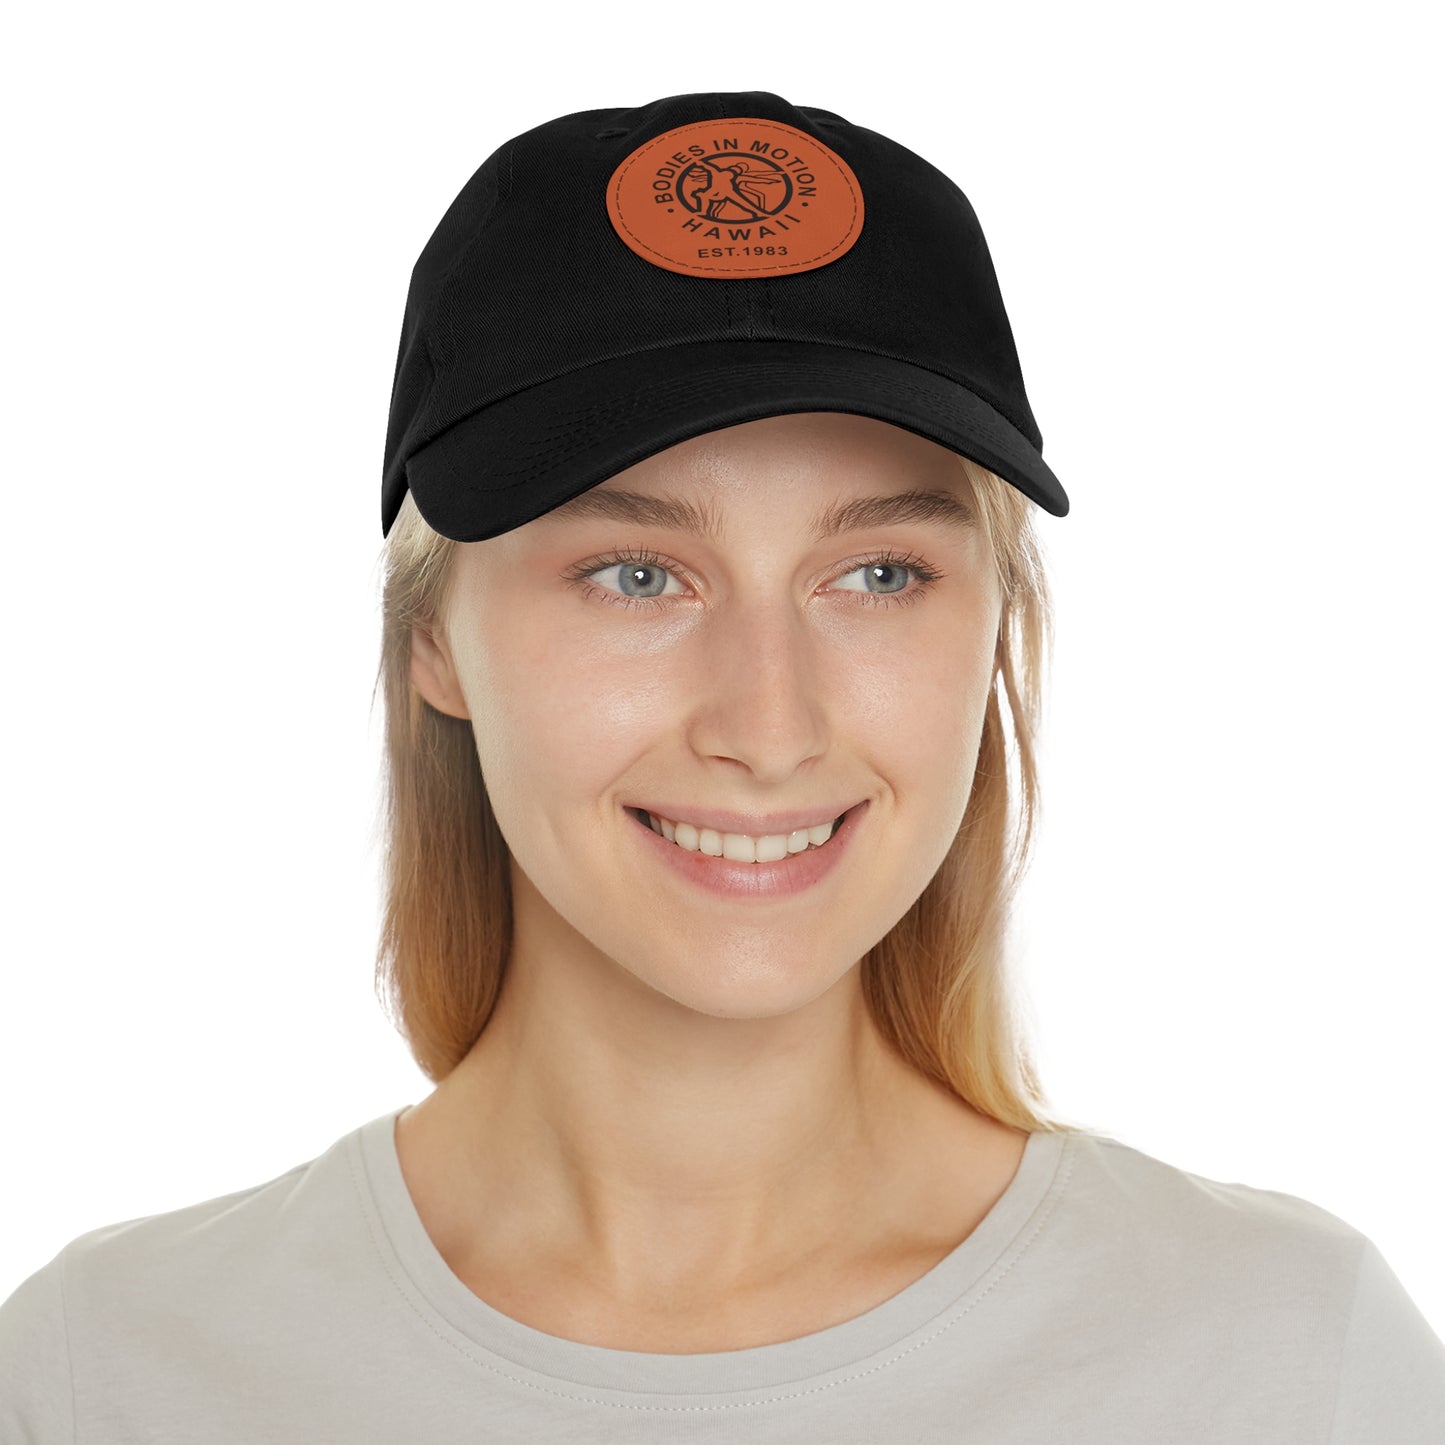 Bodies in Motio Cap with Leather Patch (Round)